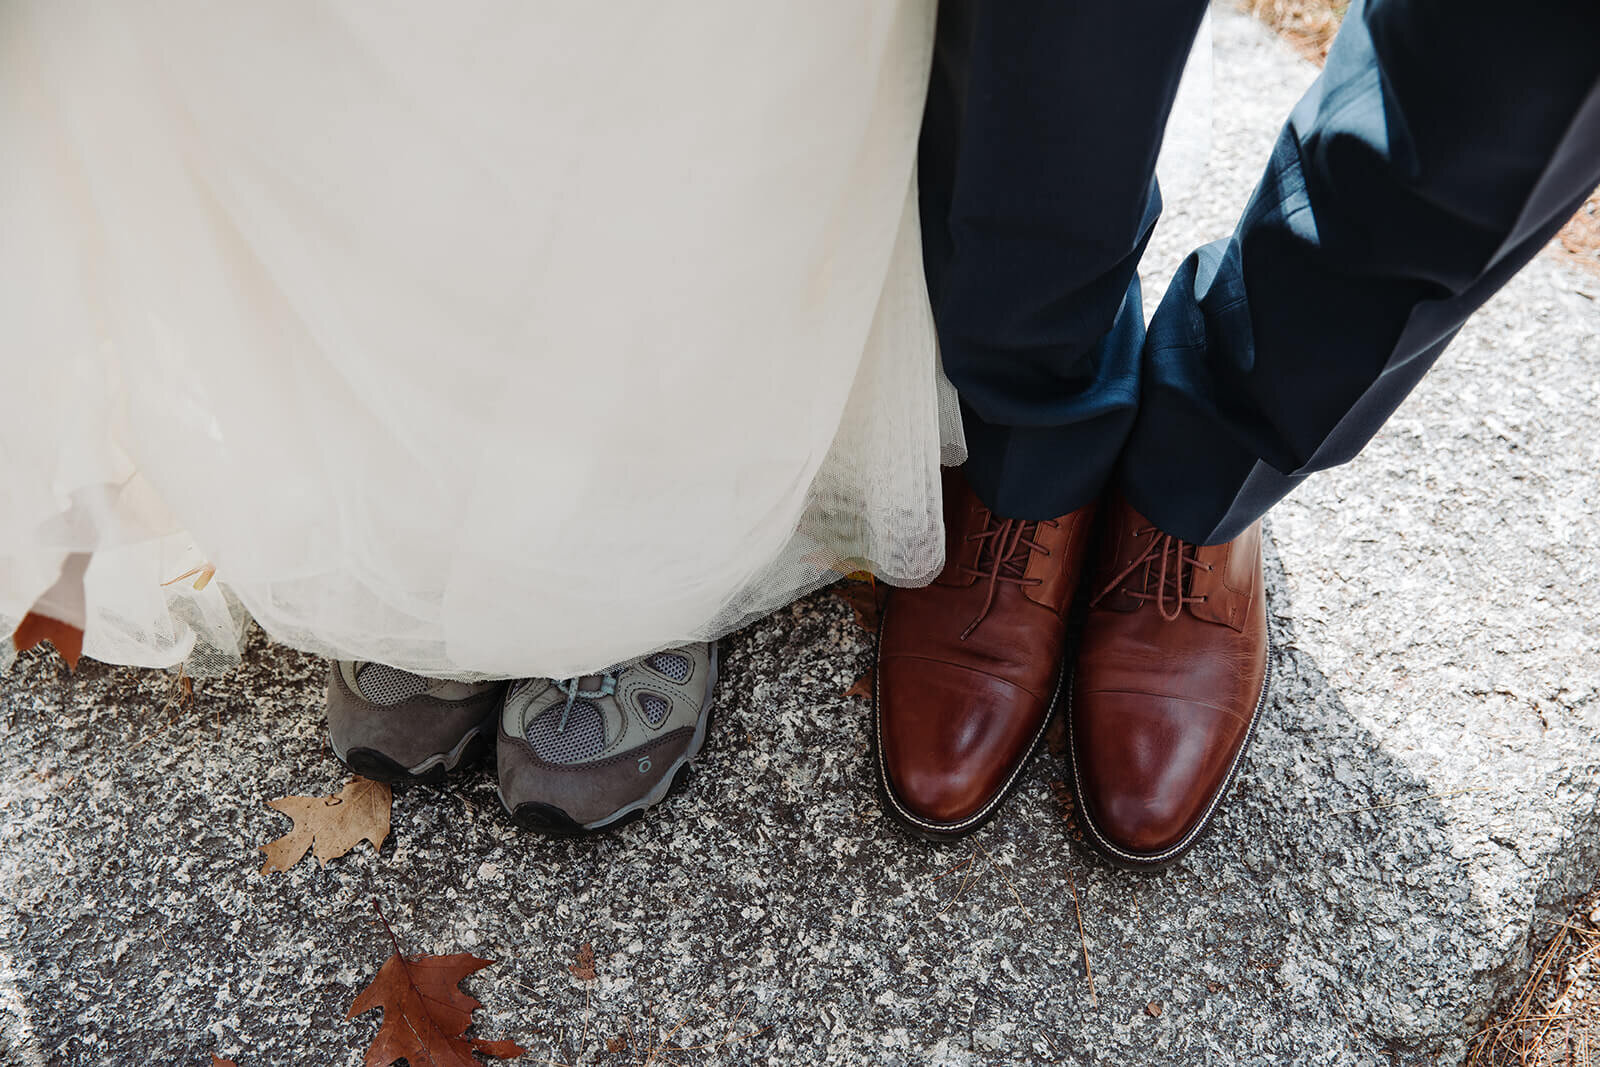  Hiking shoes during elopement in the White Mountains in New Hampshire. New Hampshire elopement 